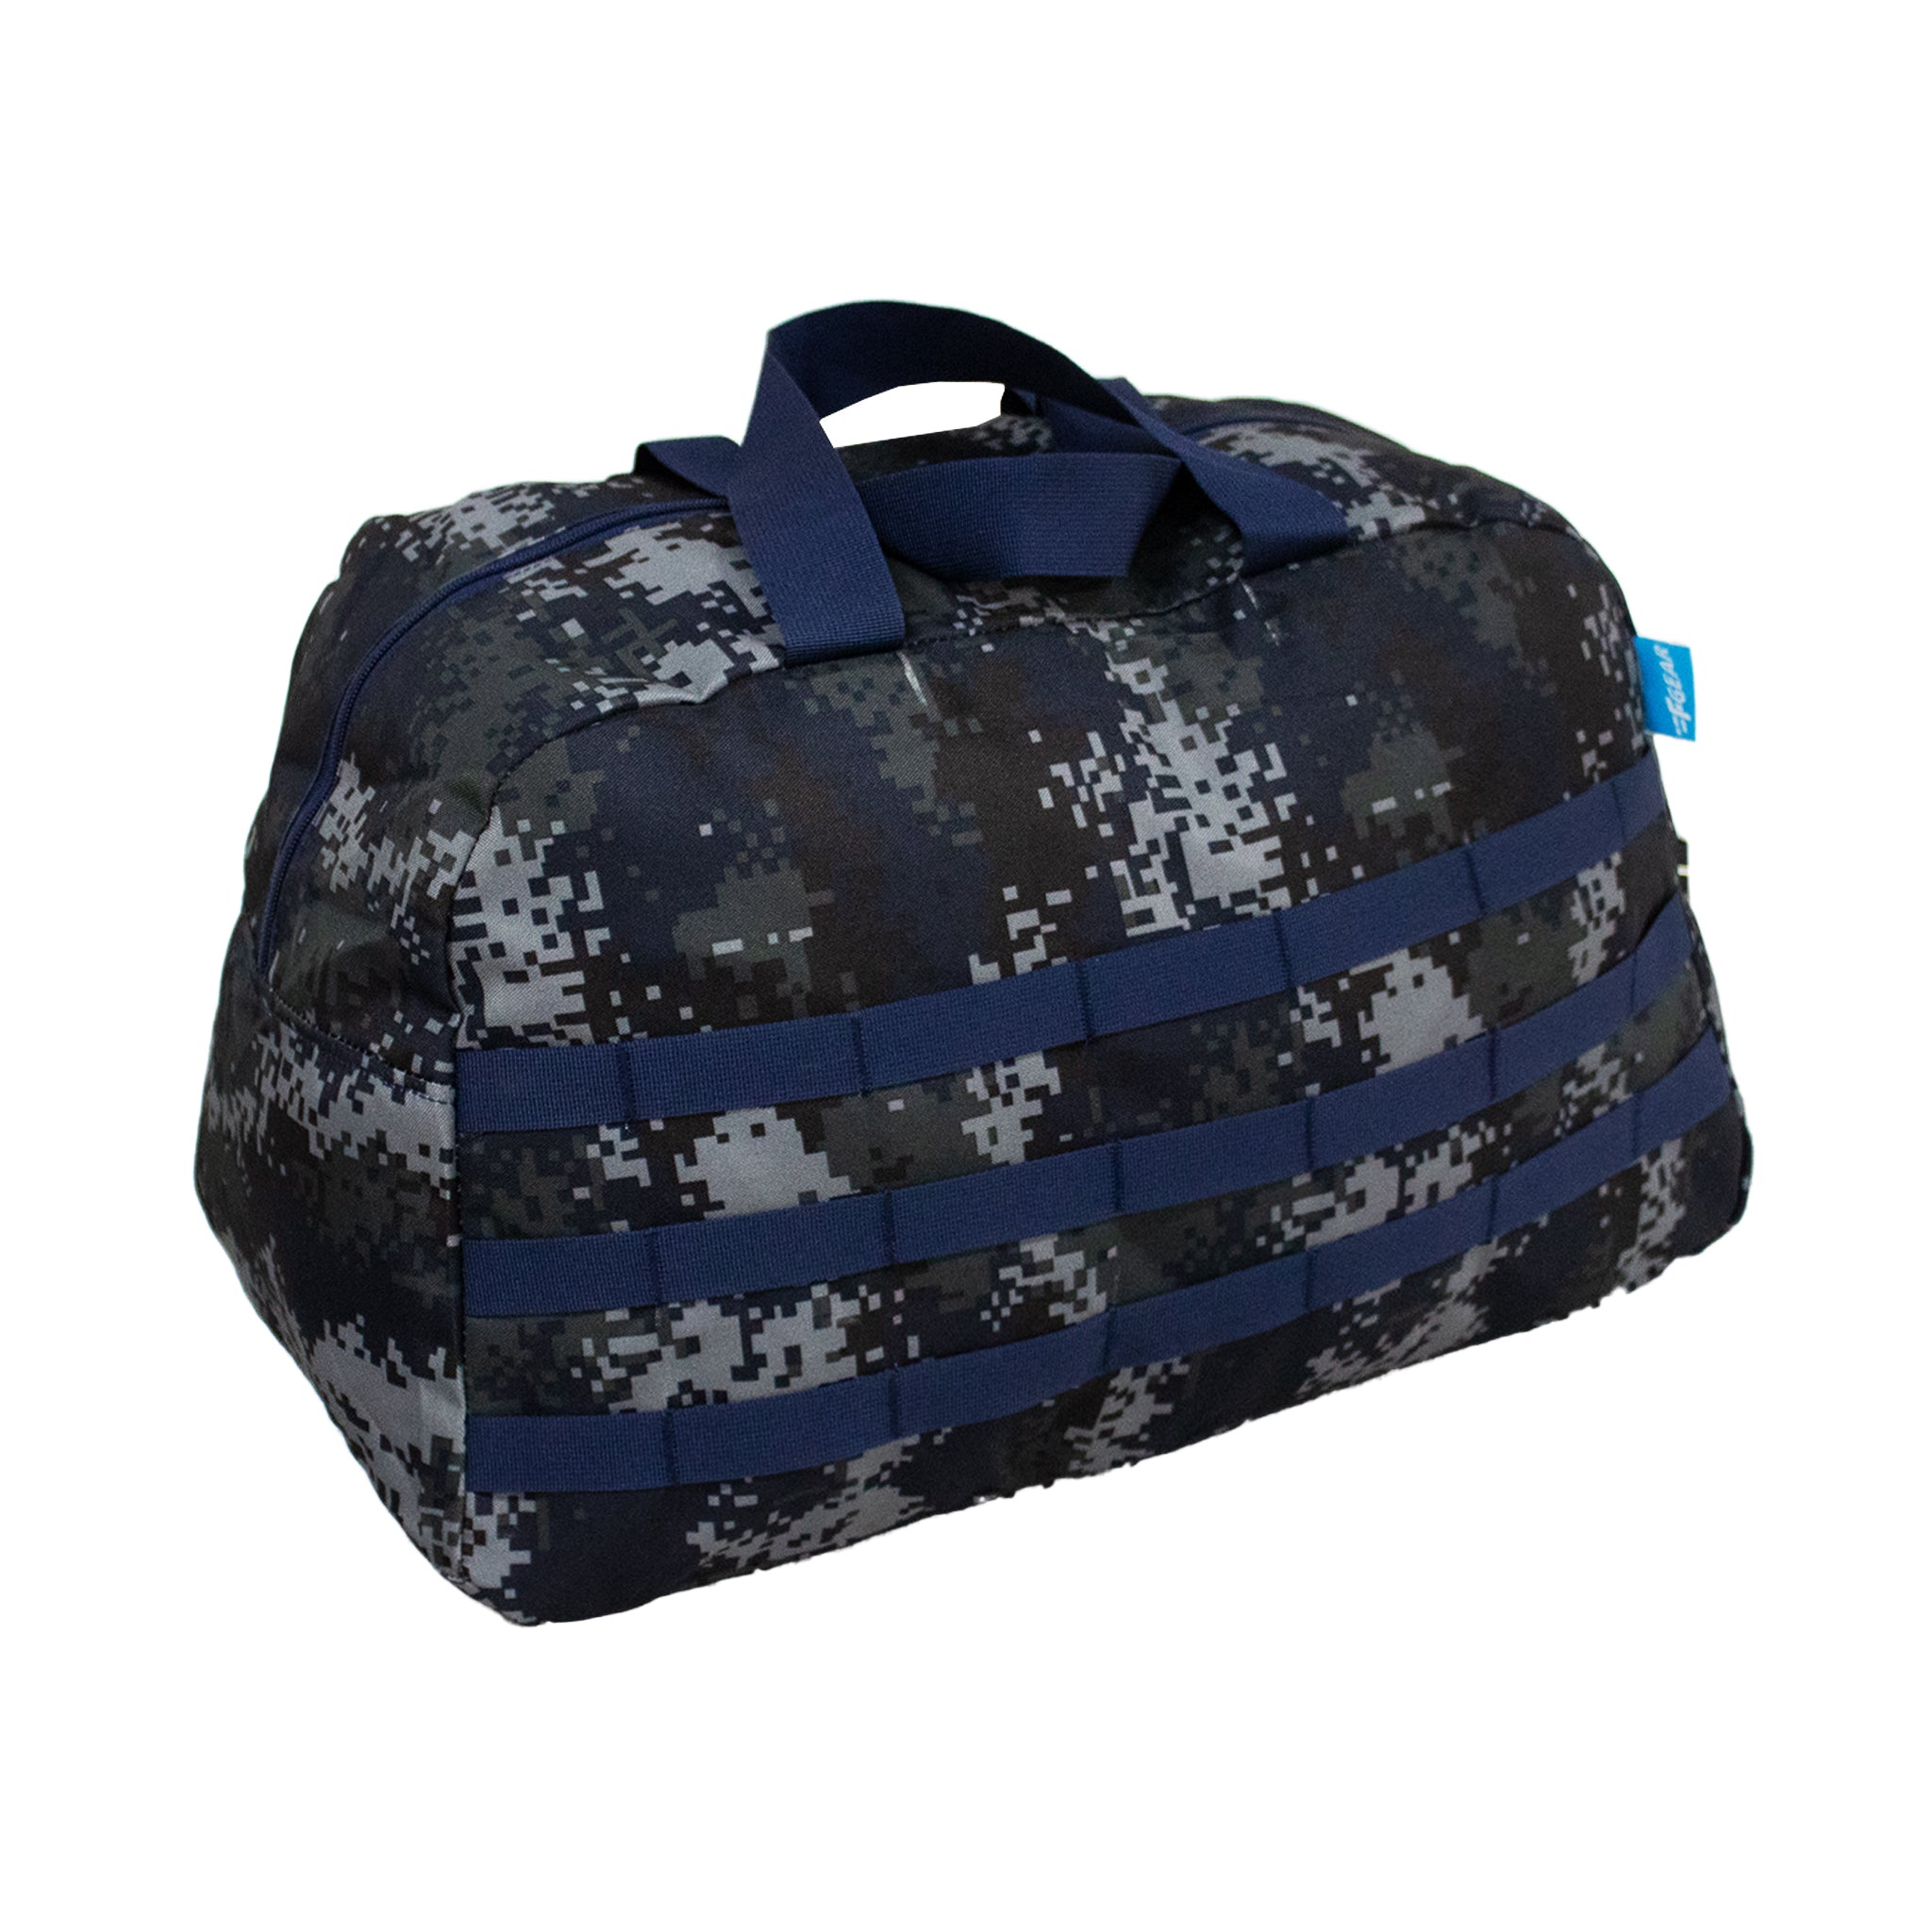 All Navy Trail Weekender Buy At DailyObjects